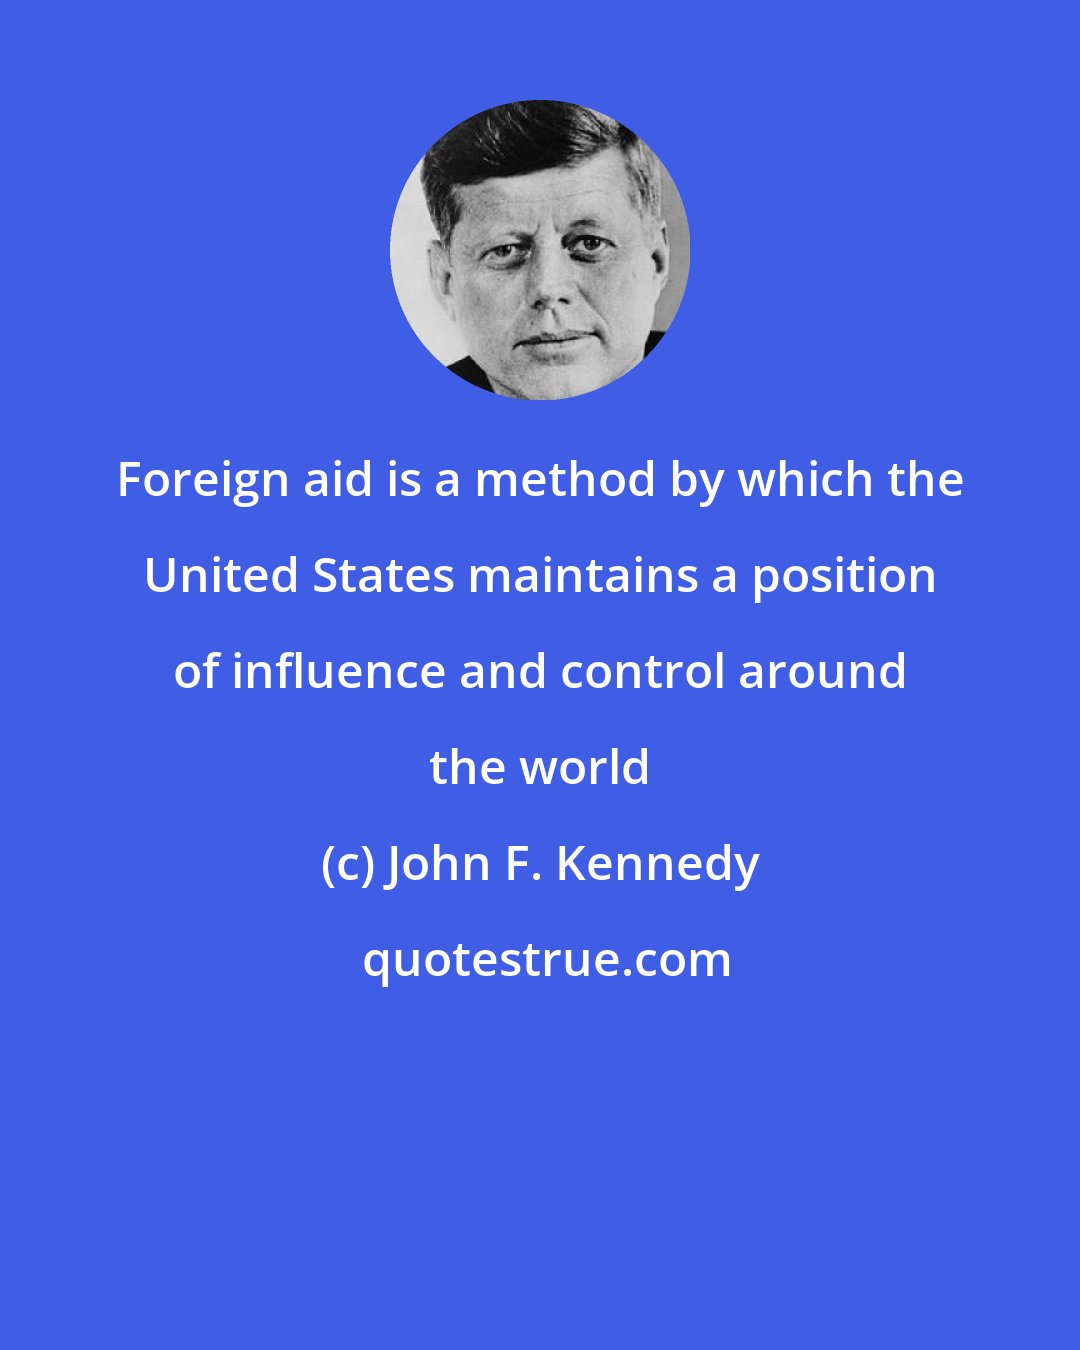 John F. Kennedy: Foreign aid is a method by which the United States maintains a position of influence and control around the world